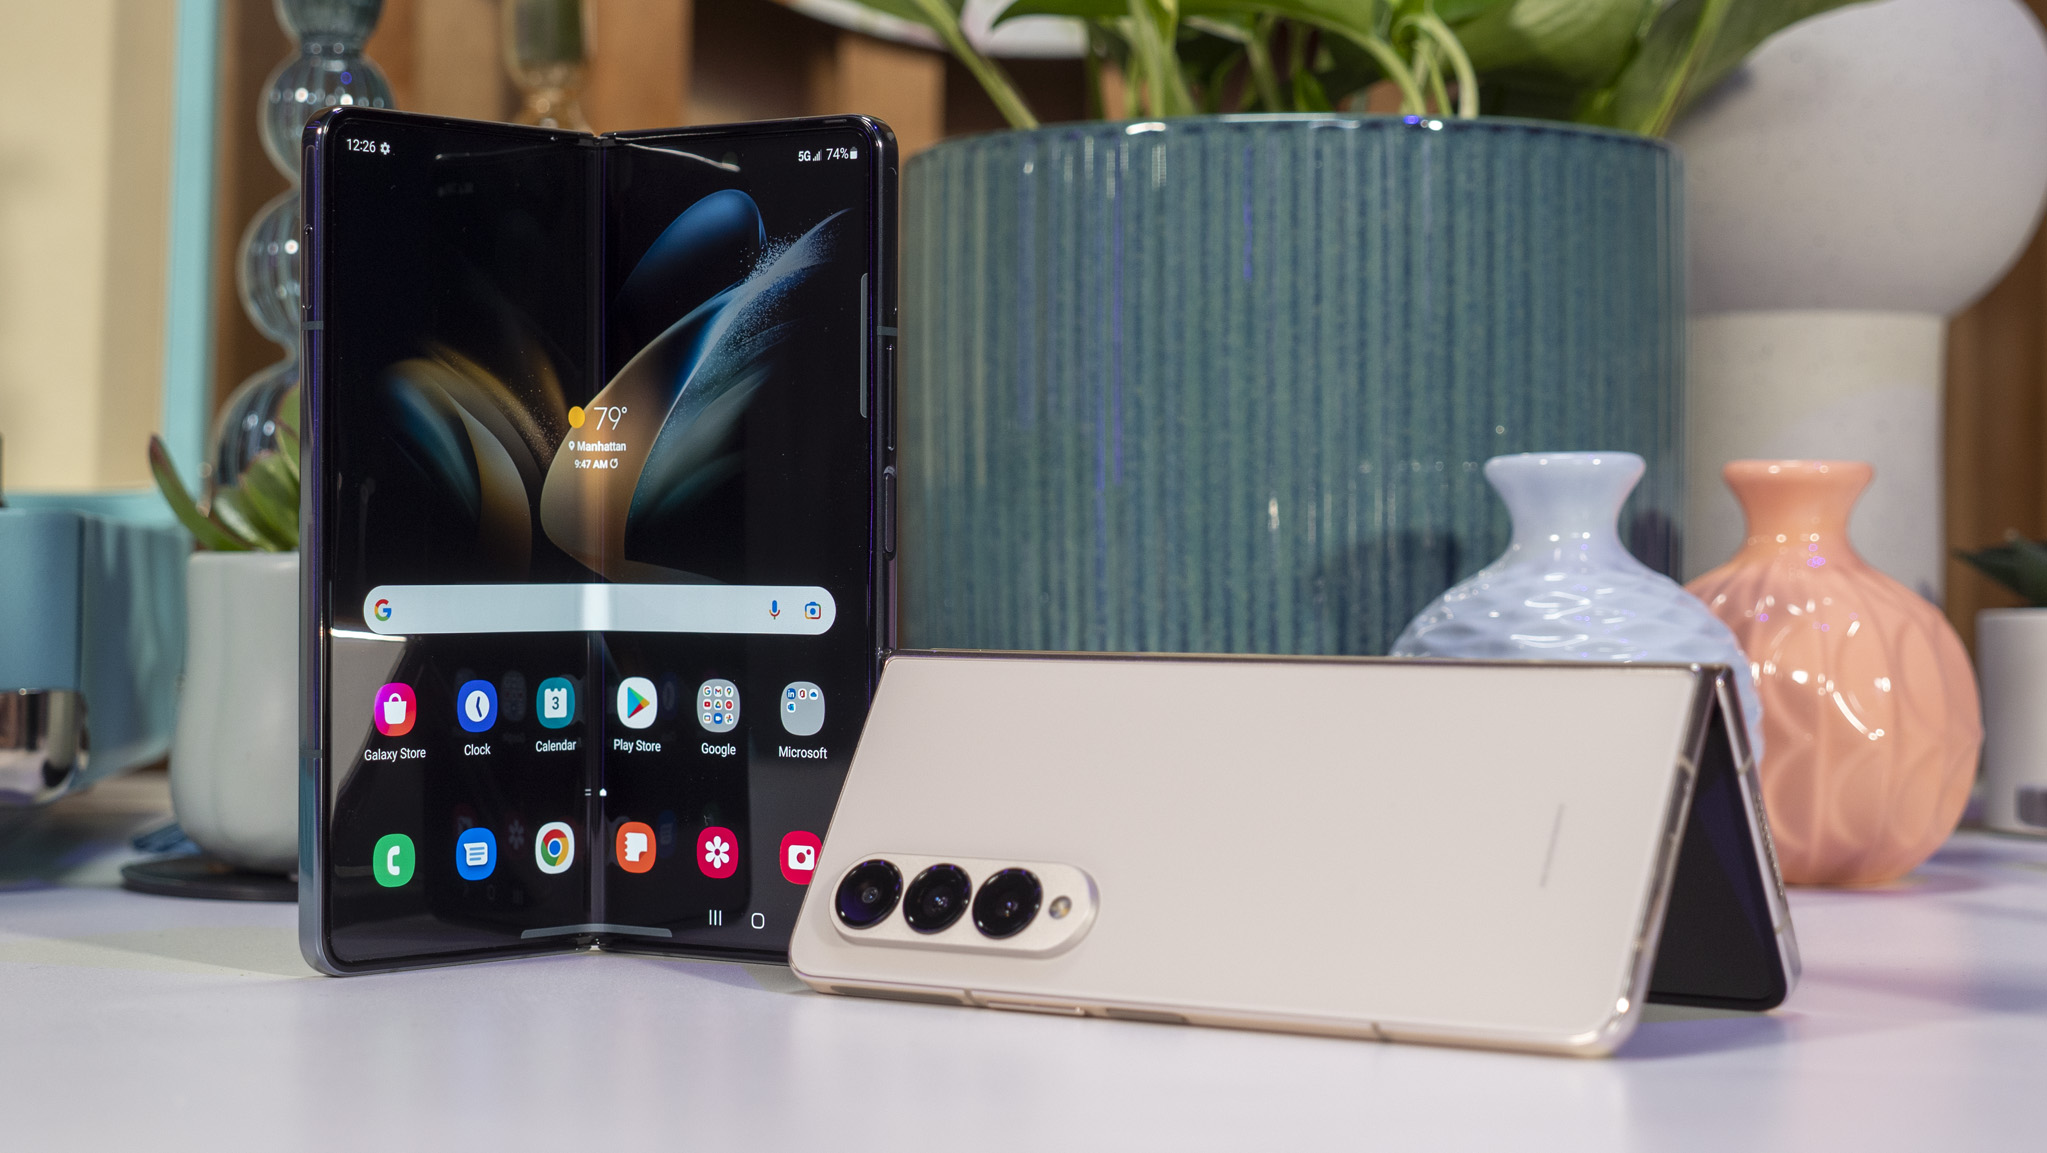 Infographic] Galaxy Z Fold4: The Multitasking Powerhouse Built To